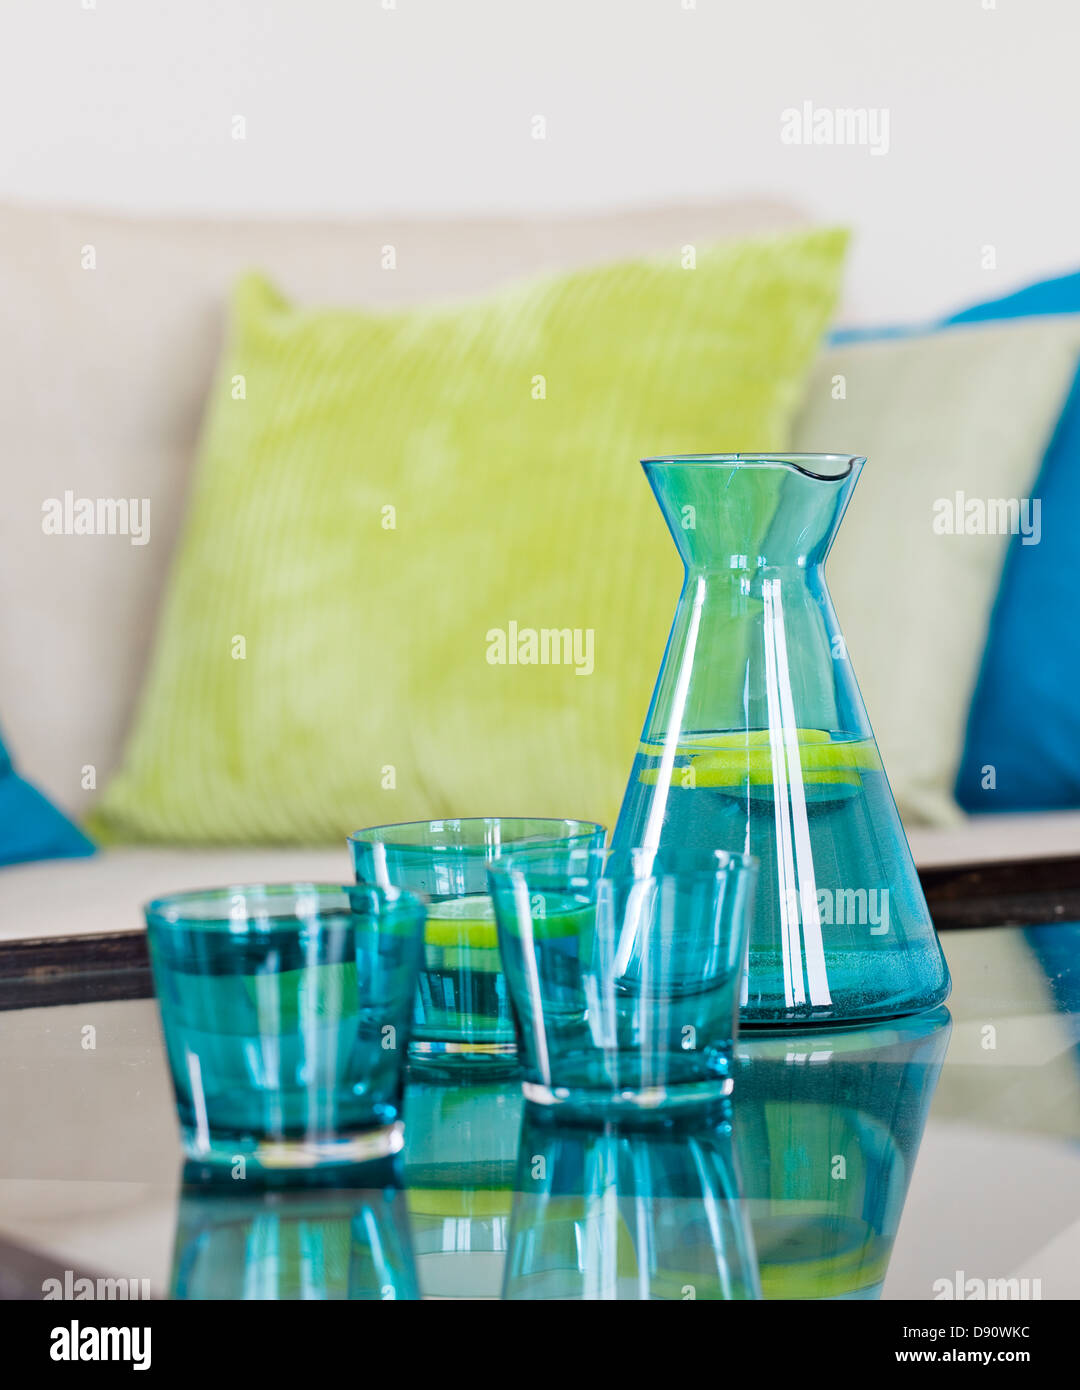 Decanter with glasses, sofa in background Stock Photo